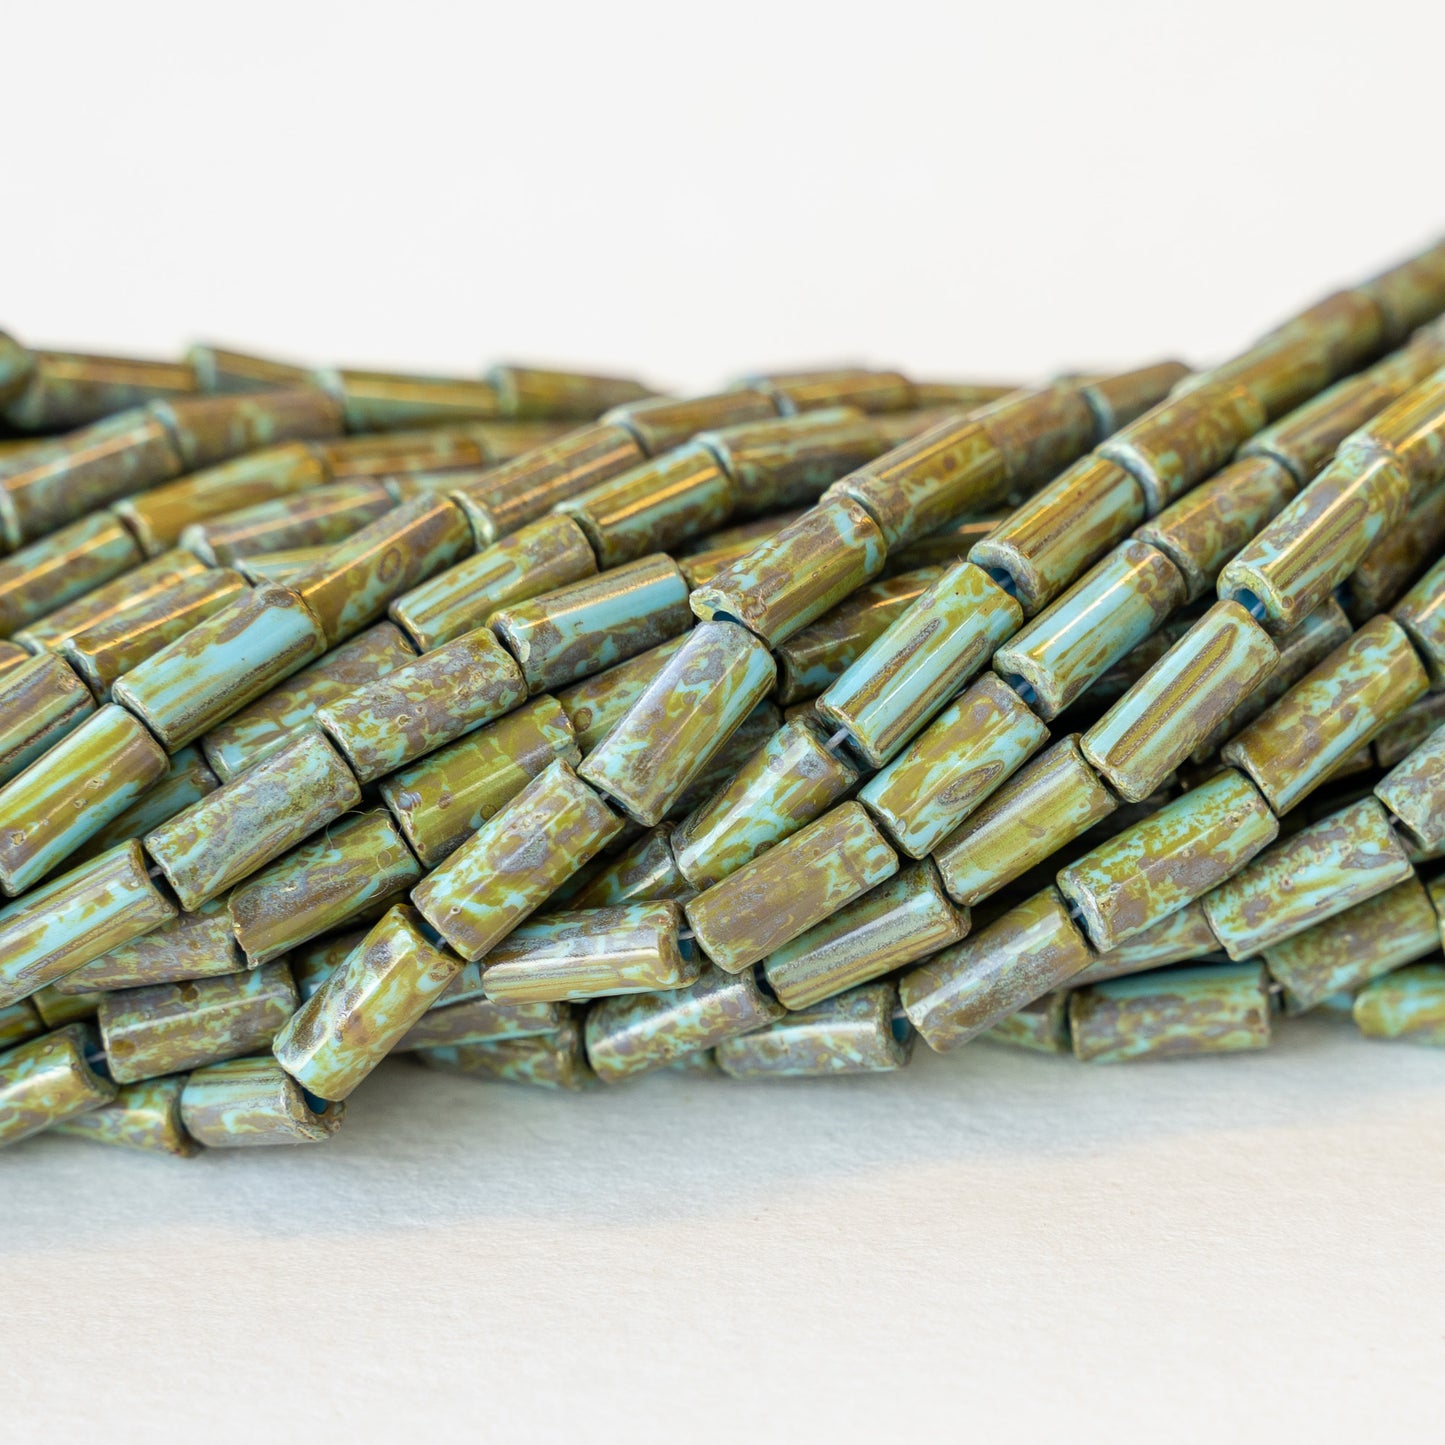 9x4mm Glass Tube Beads - Turquoise Picasso - 20 or 60 Inches